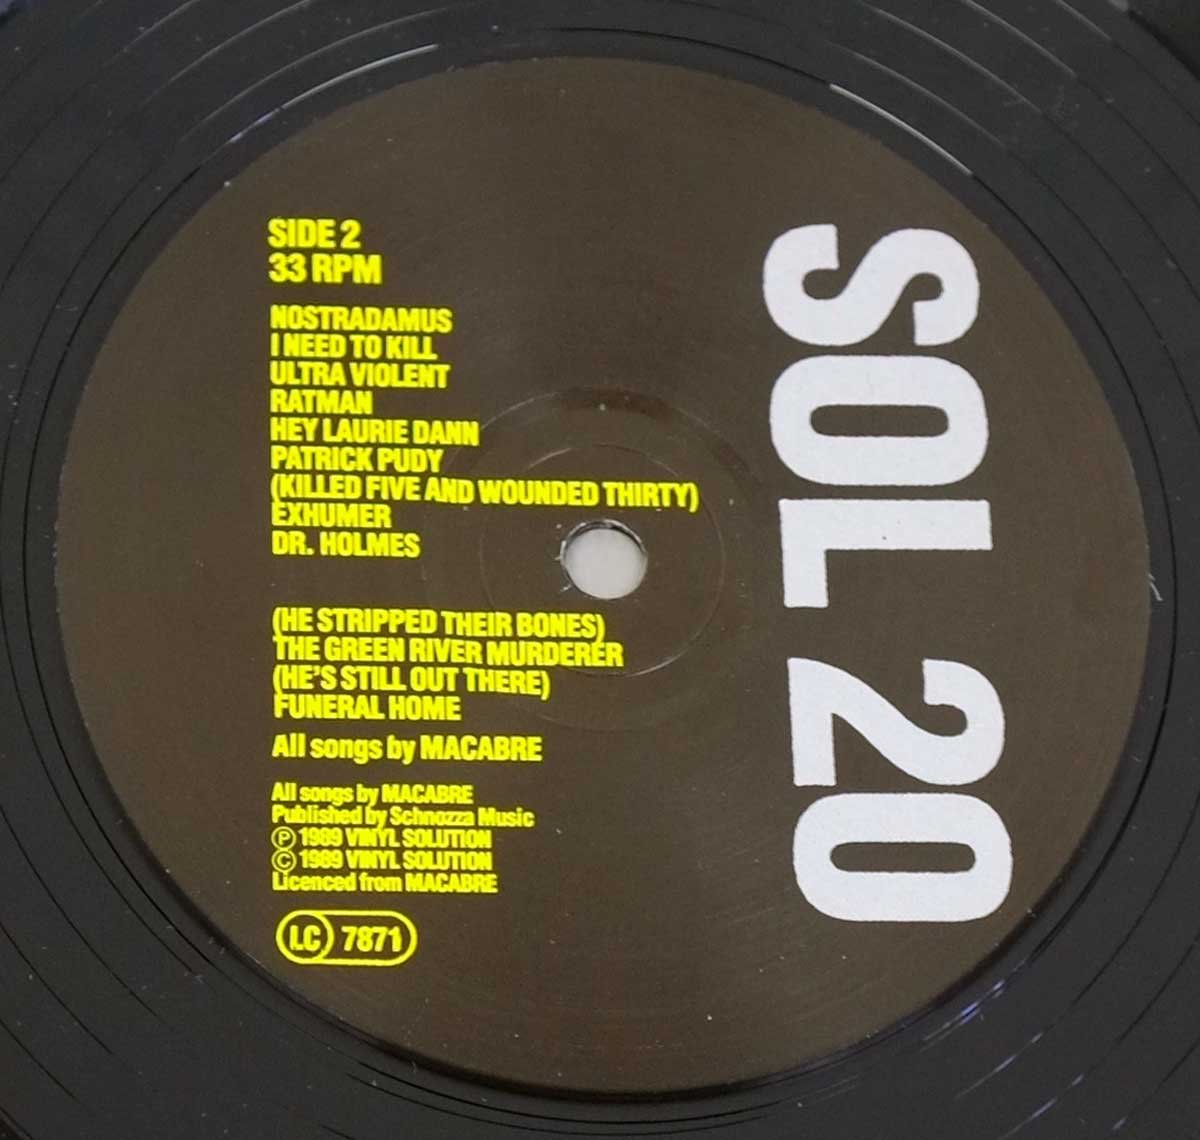 Close-up photo of the Black "Vinyl Solution" SOL 20 Record Label  